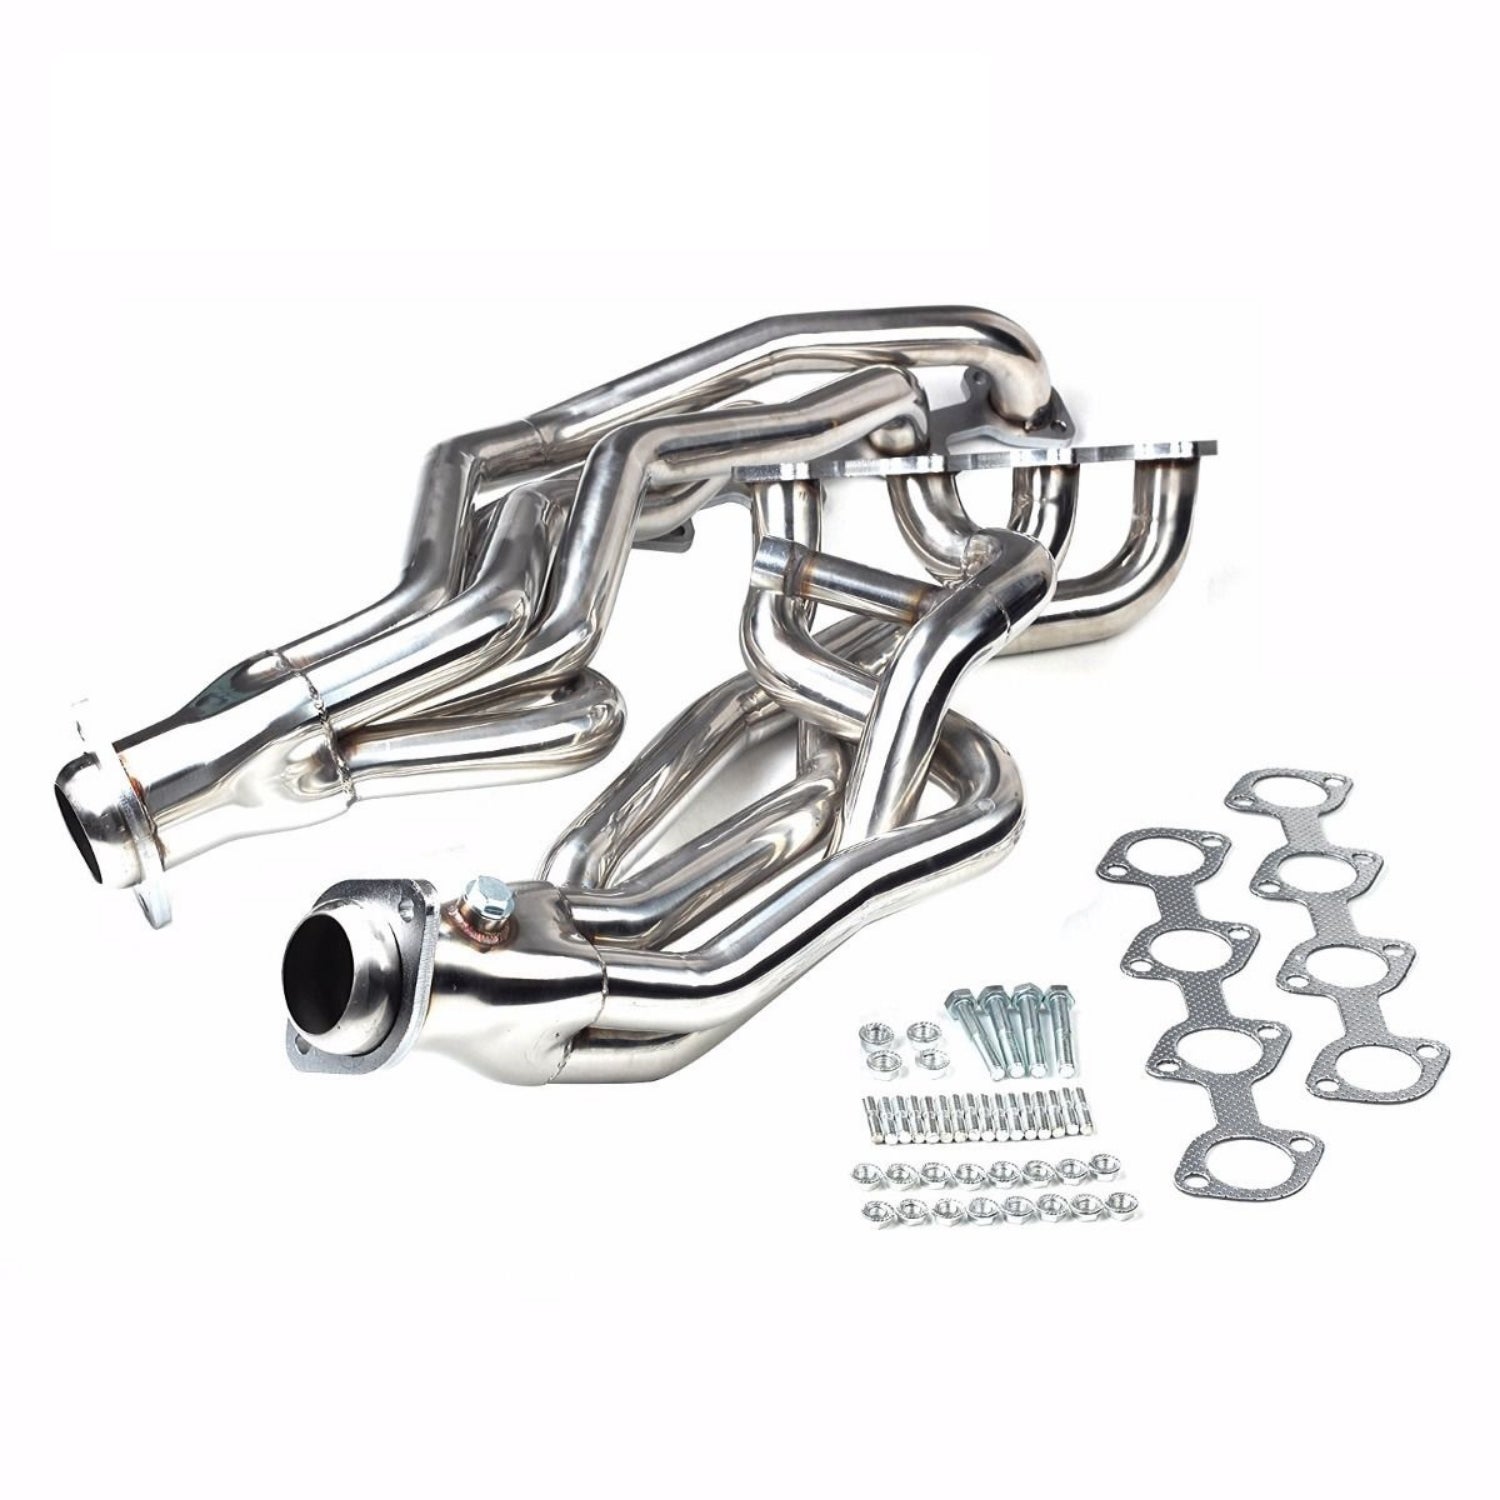 Exhaust Manifold Headers for 1996-2004 Ford Mustang GT V8 4.6